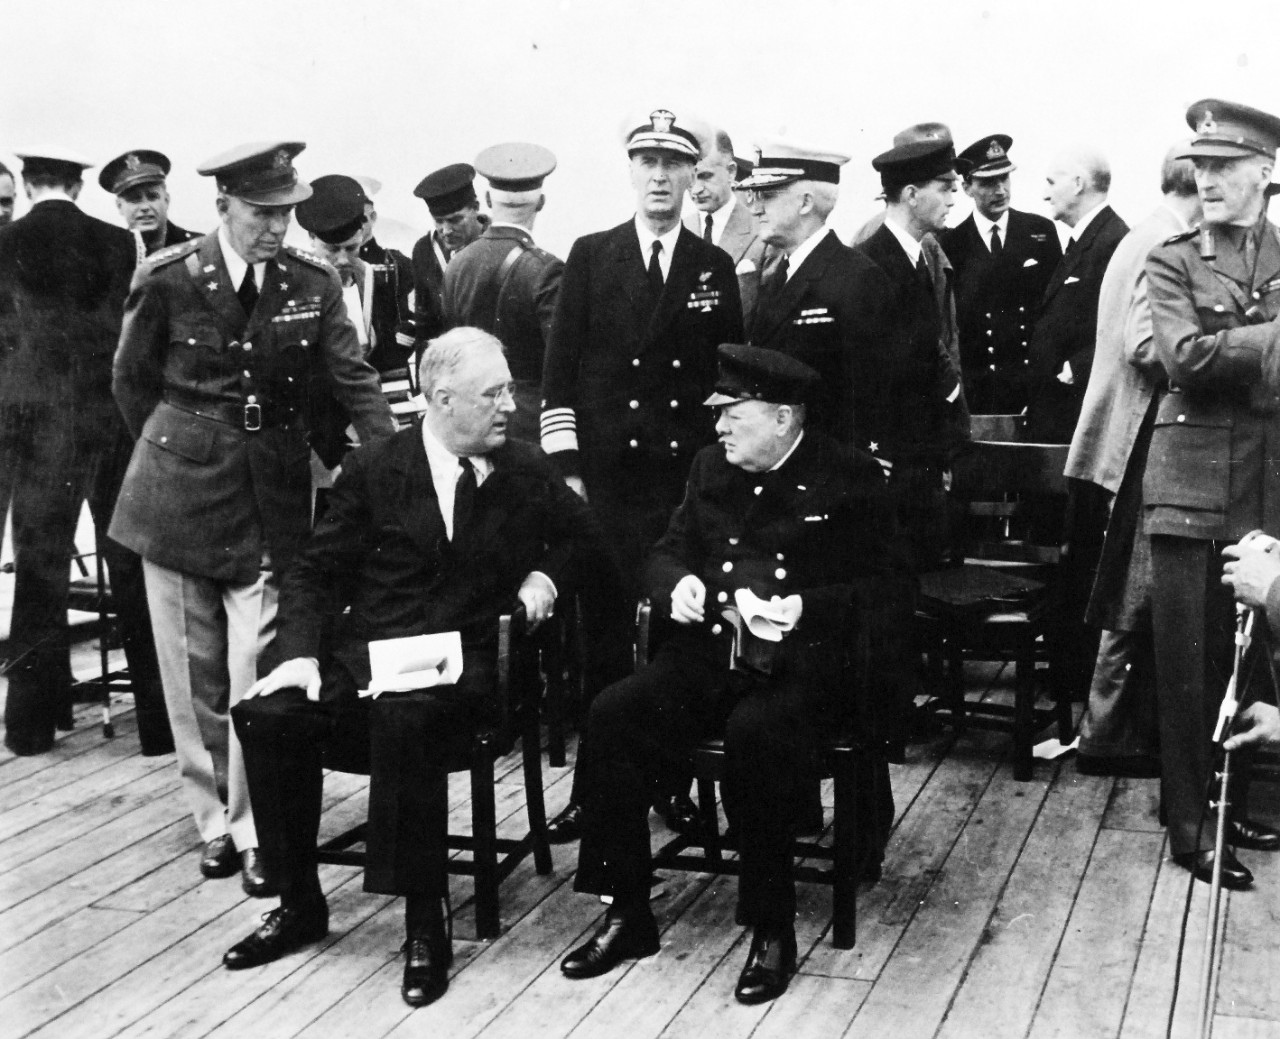 80-G-26847: Atlantic Charter, August 1941.  Informal group on deck of Royal Navy King George V battleship Prince of Wales following church services, during the Atlantic Charter meeting.  Standing behind President Franklin D. Roosevelt and Prime Minister Winston S. Churchill are General George C. Marshall, Admiral Ernest J. King, Admiral Harold R. Stark and General Sir John Dill.   Photograph released August 10, 1941.   Official U.S. Navy Photograph, now in the collections of the National Archives.  (2016/03/22).